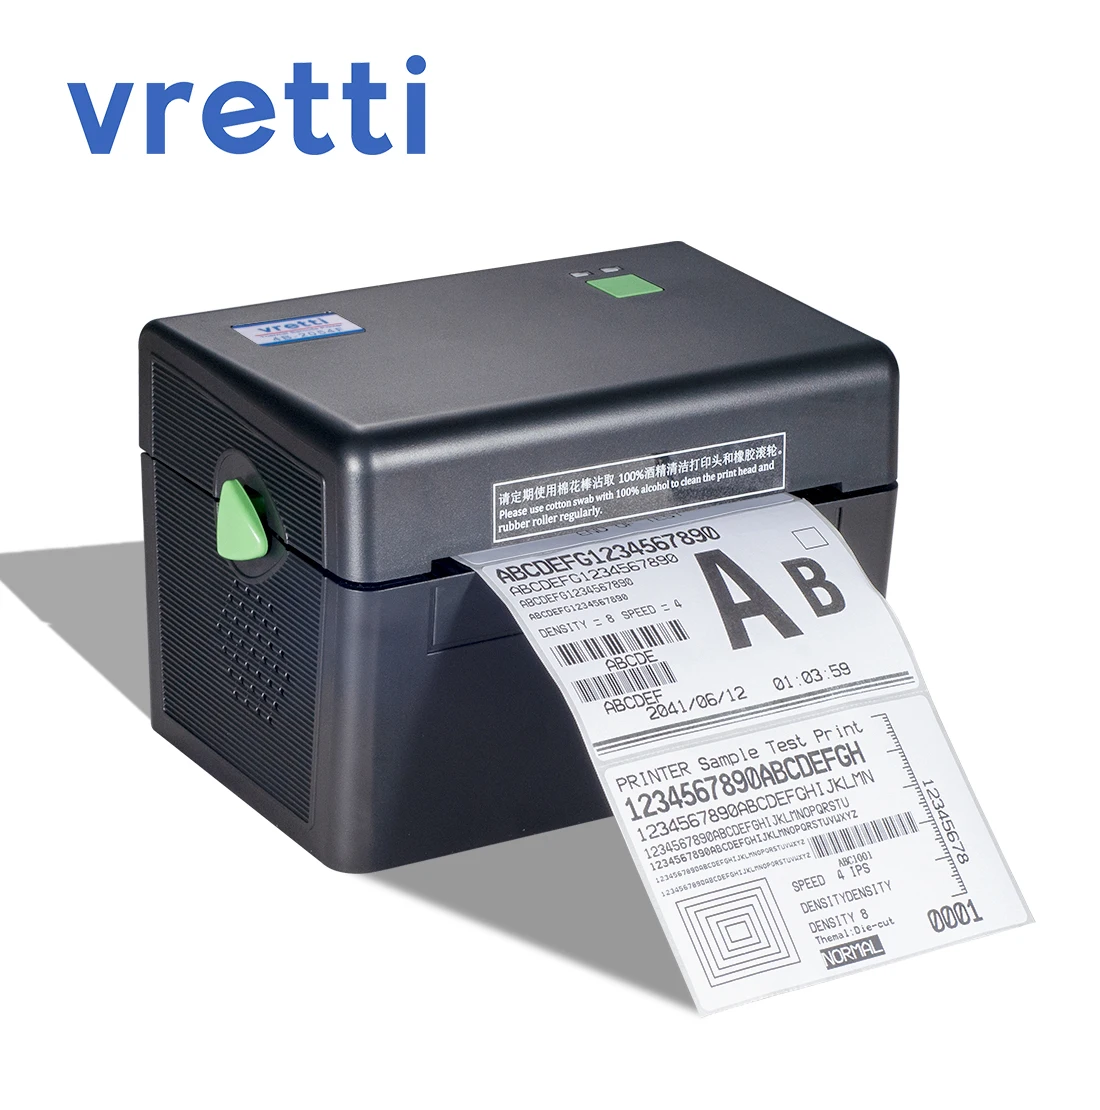 Vretti DT108B Desktop 4x6 Thermal Label Printer Compatible With Windows Mac For Shipping Package Small Business USB shopify ebay